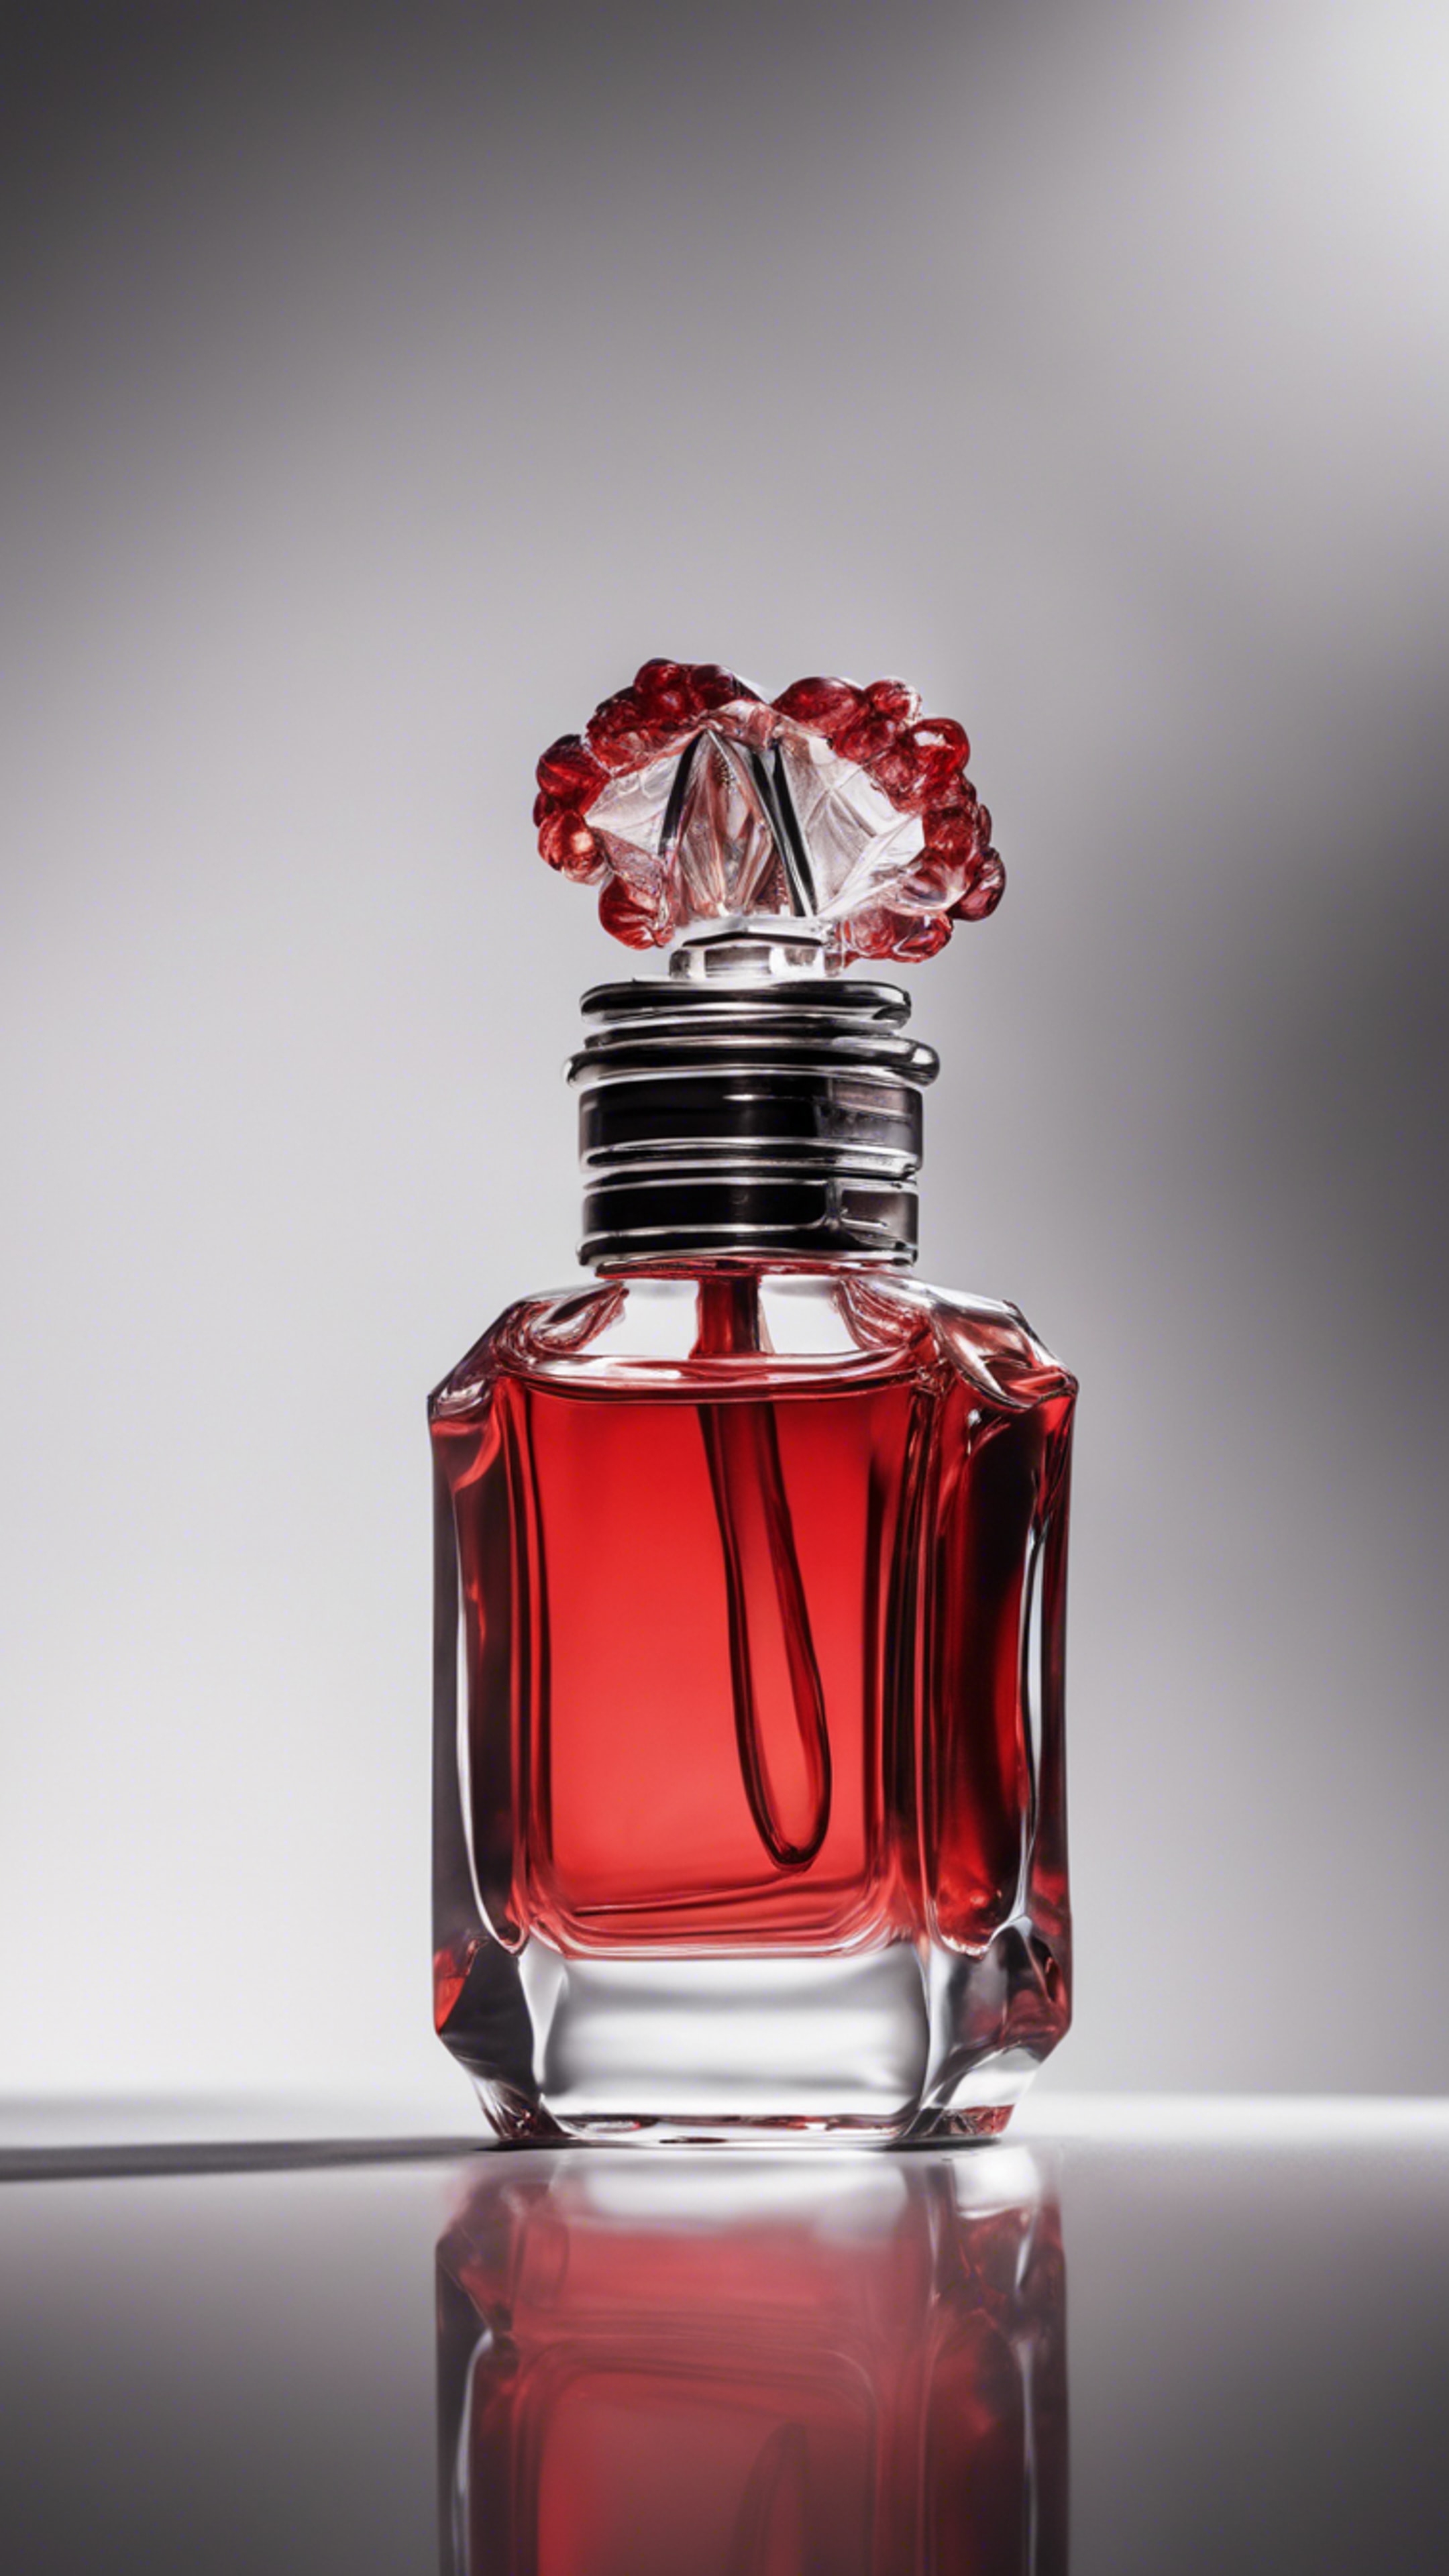 The portrait of a sassy red perfume bottle clashing against a pure white backdrop. Wallpaper[8445b62606744831bb5a]